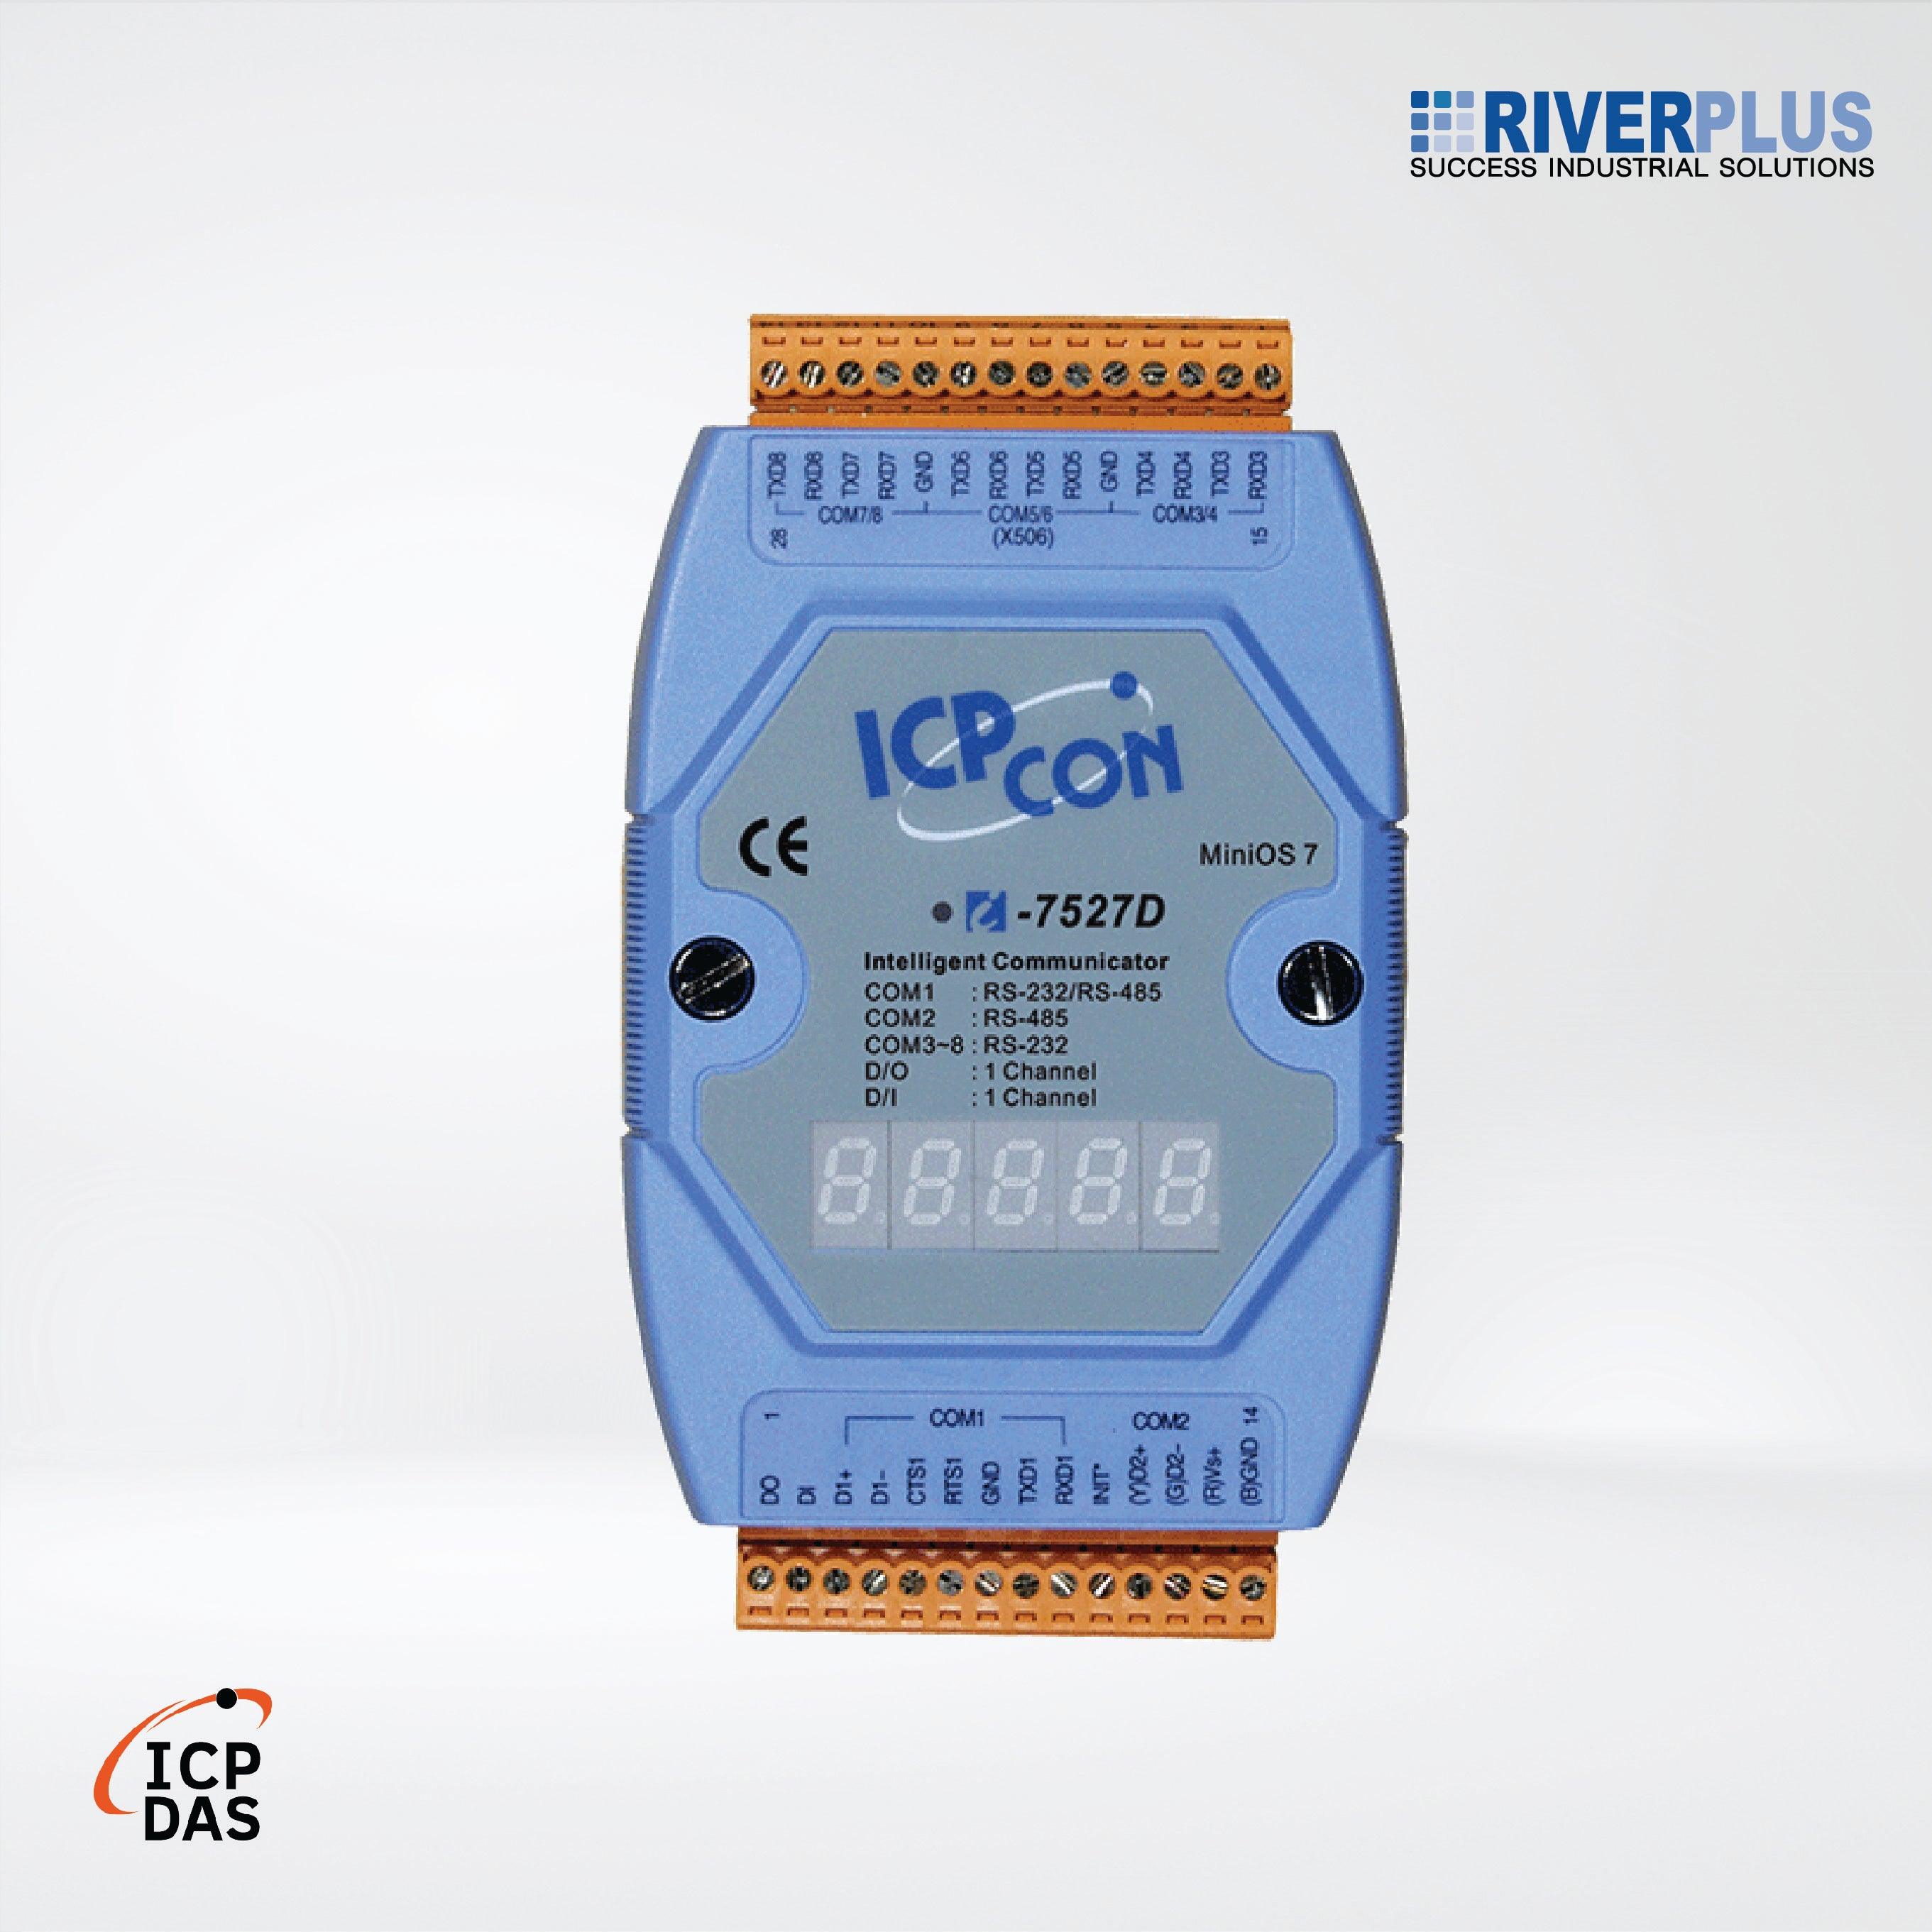 I-7527D Addressable RS-485 to 7 x RS-232/RS-485 Converter with 1 DI, 1 DO and 7-Segment LED Display (Blue Cover) - Riverplus